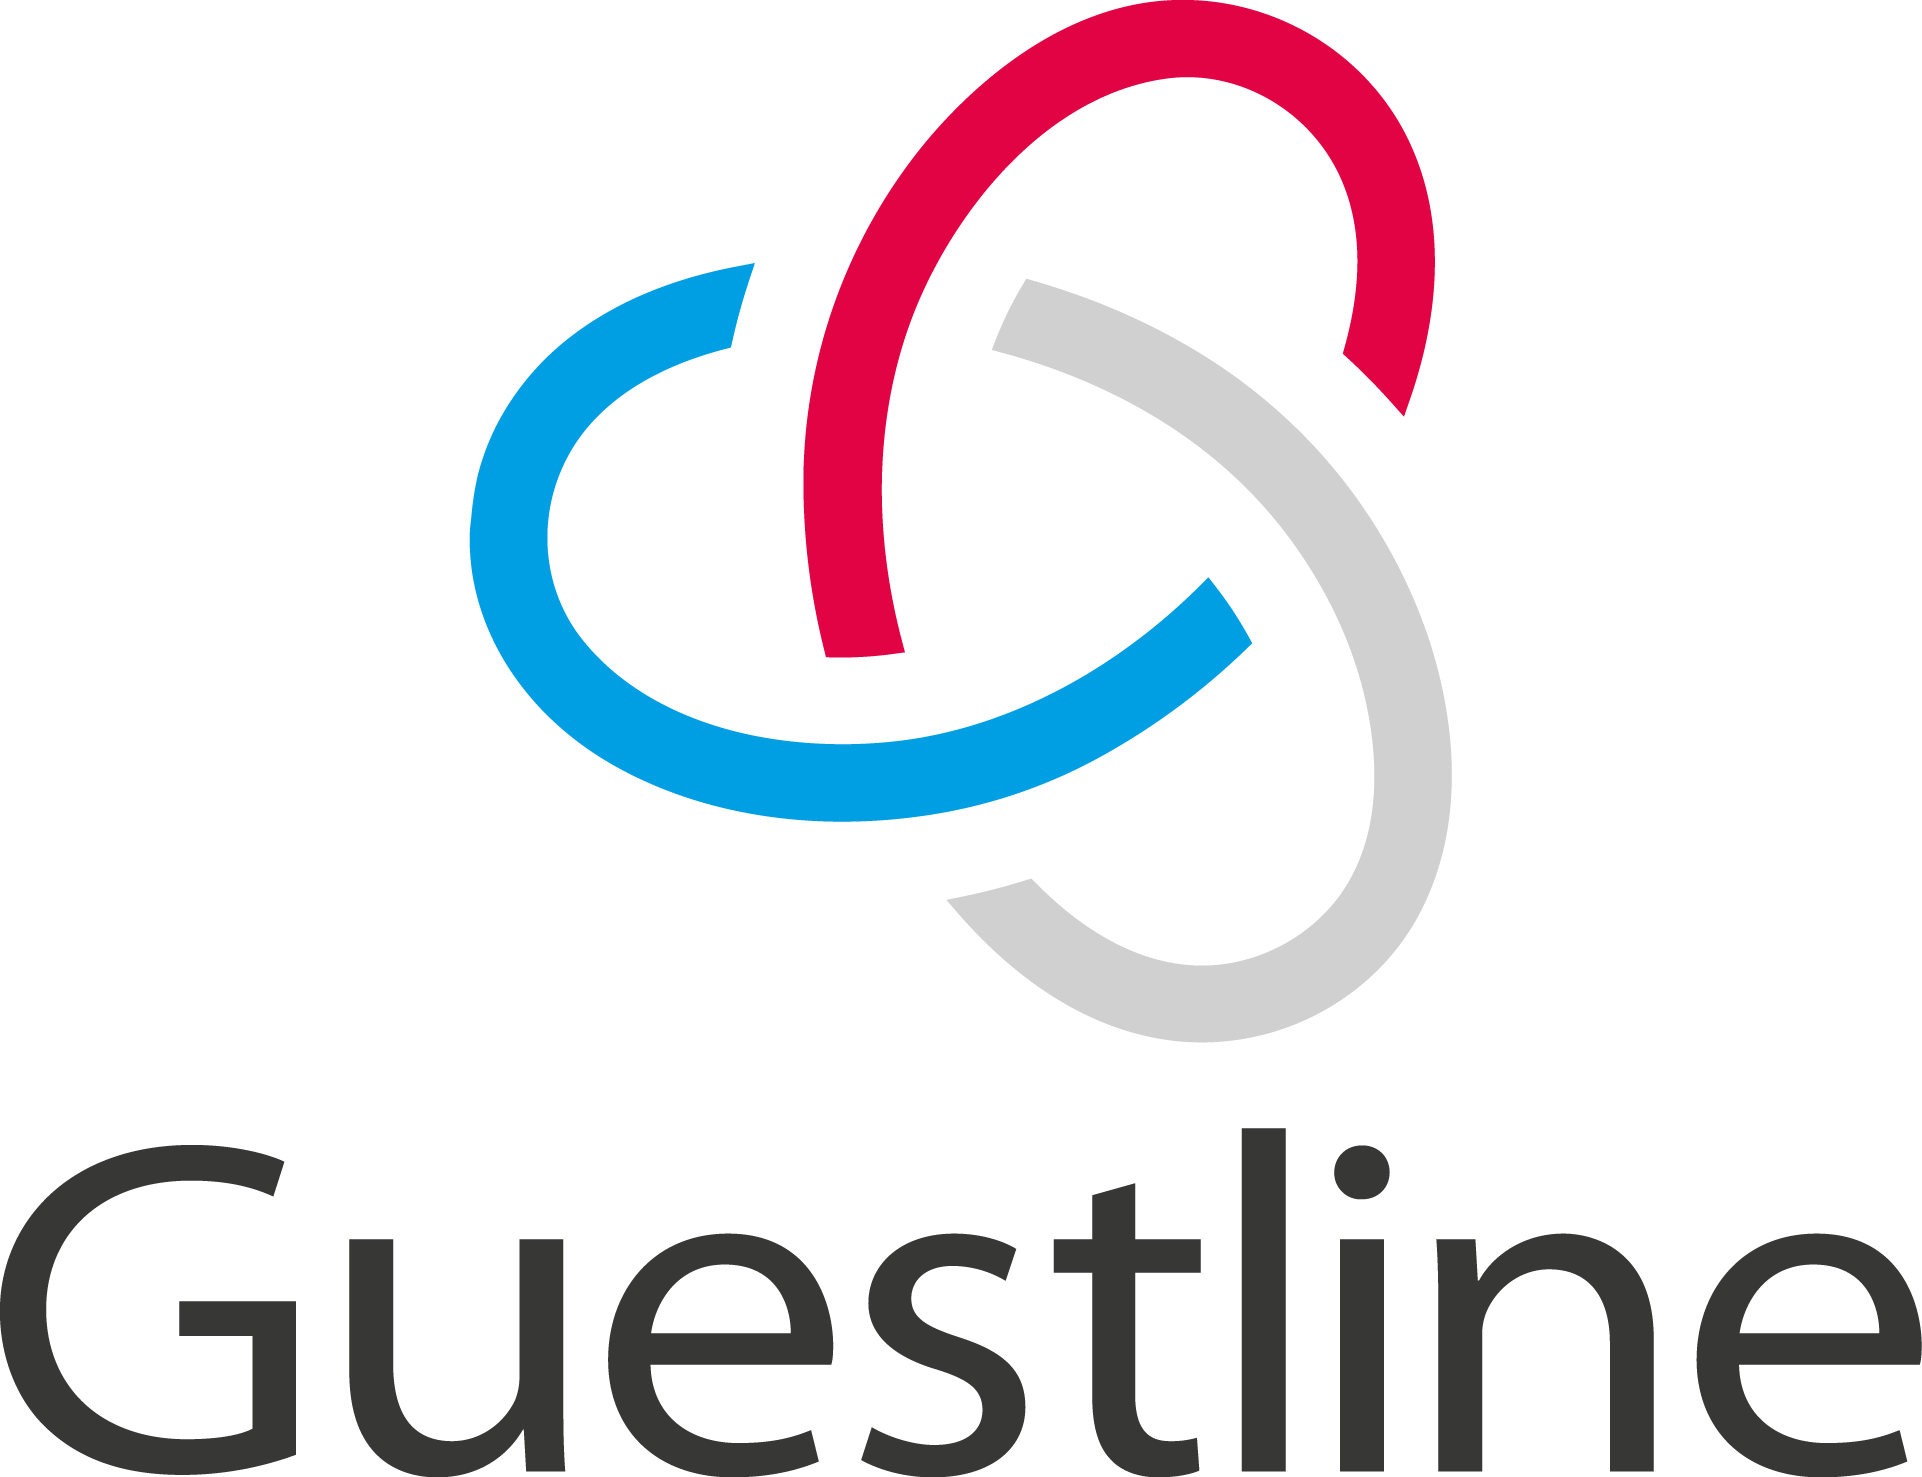 Guestline partner with GuestRevu to drive guest feedback and boost revenue